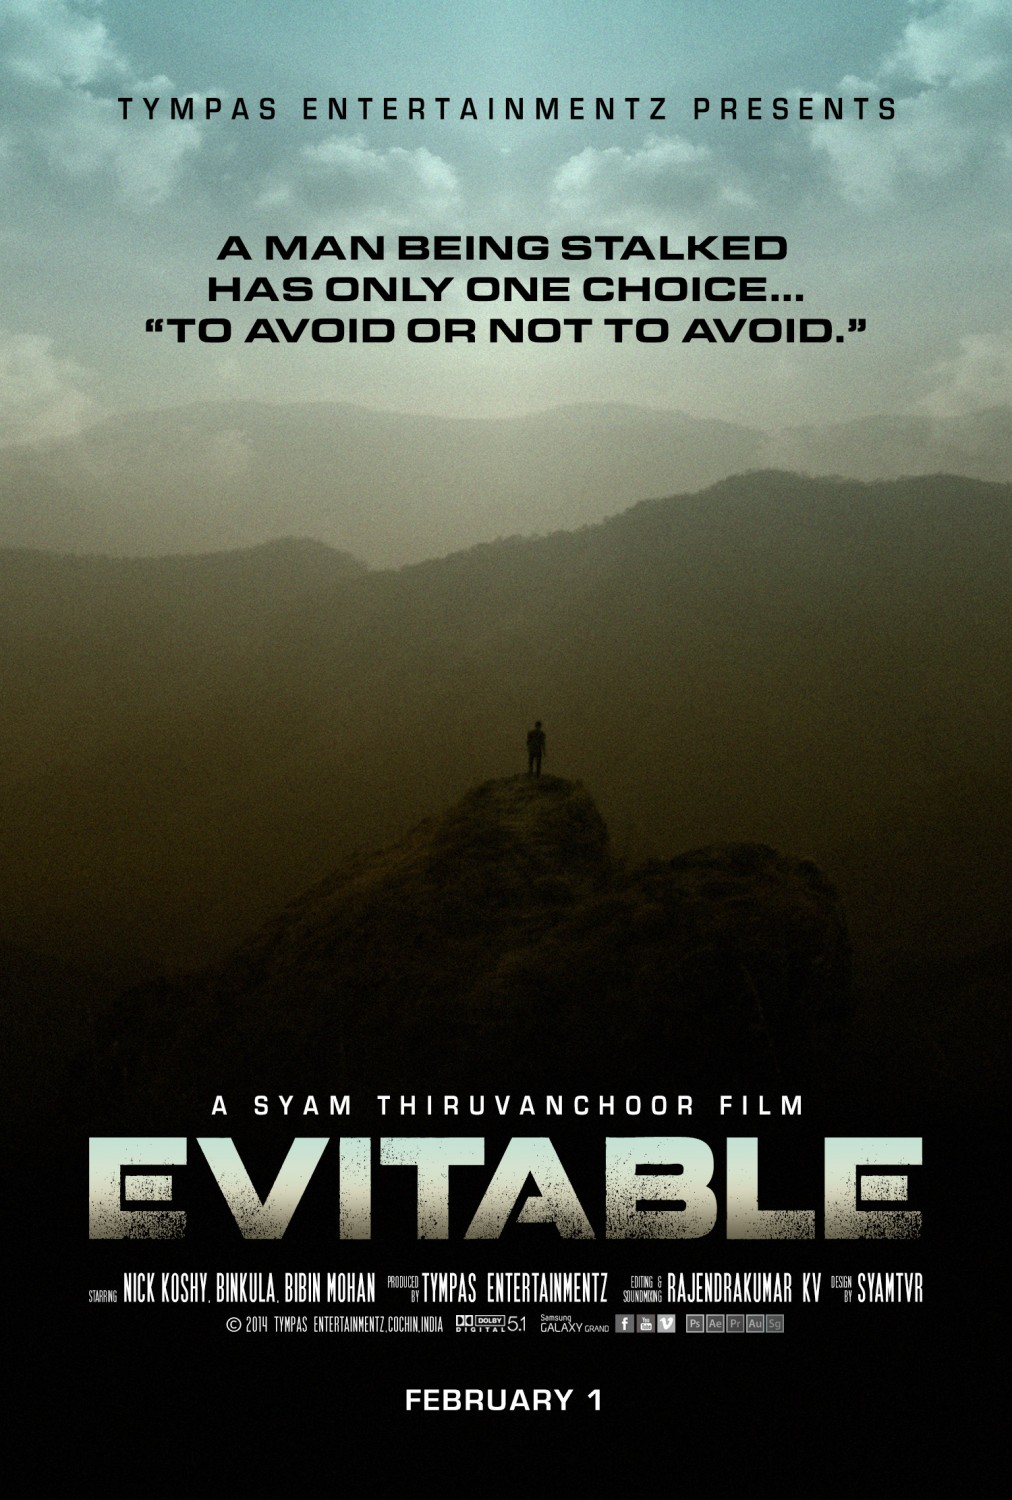 Extra Large Movie Poster Image for Evitable